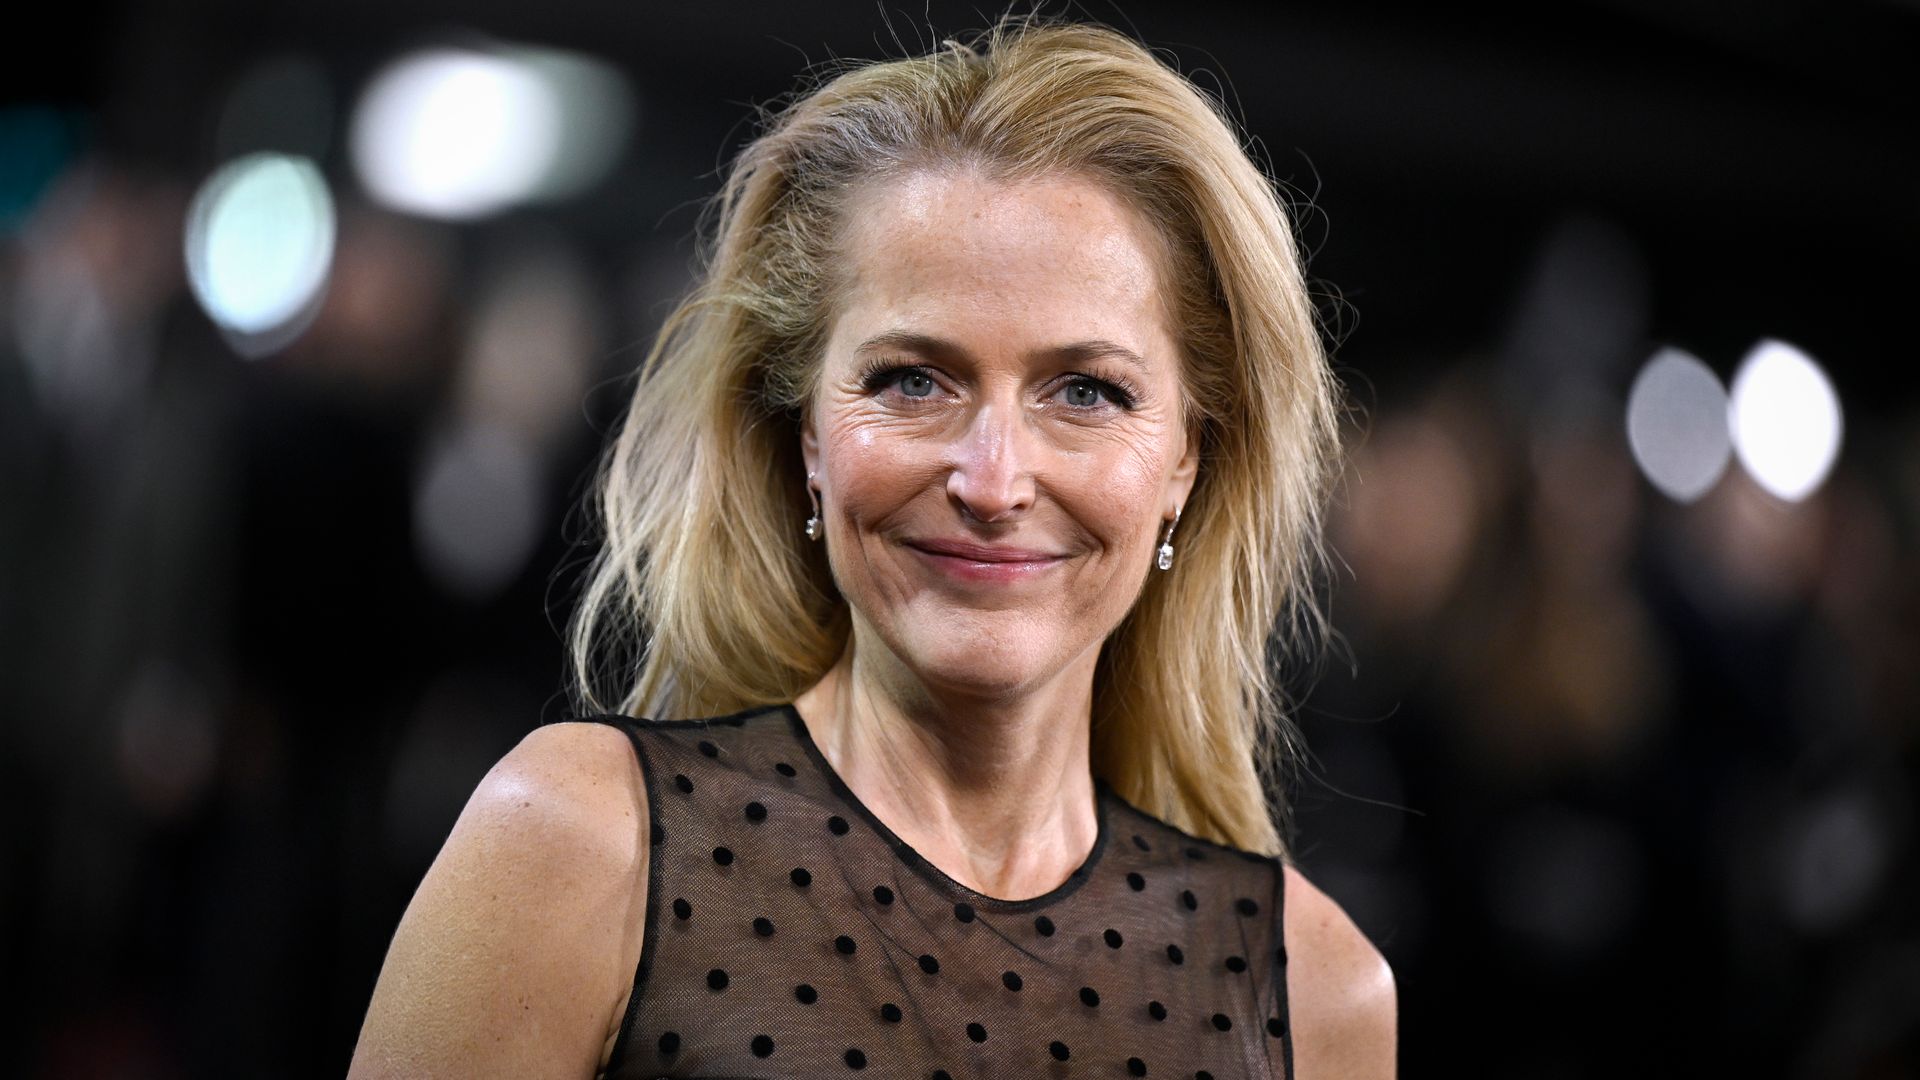 Exclusive: Gillian Anderson is on a mission to empower women and tackle the 'shame' of taboos